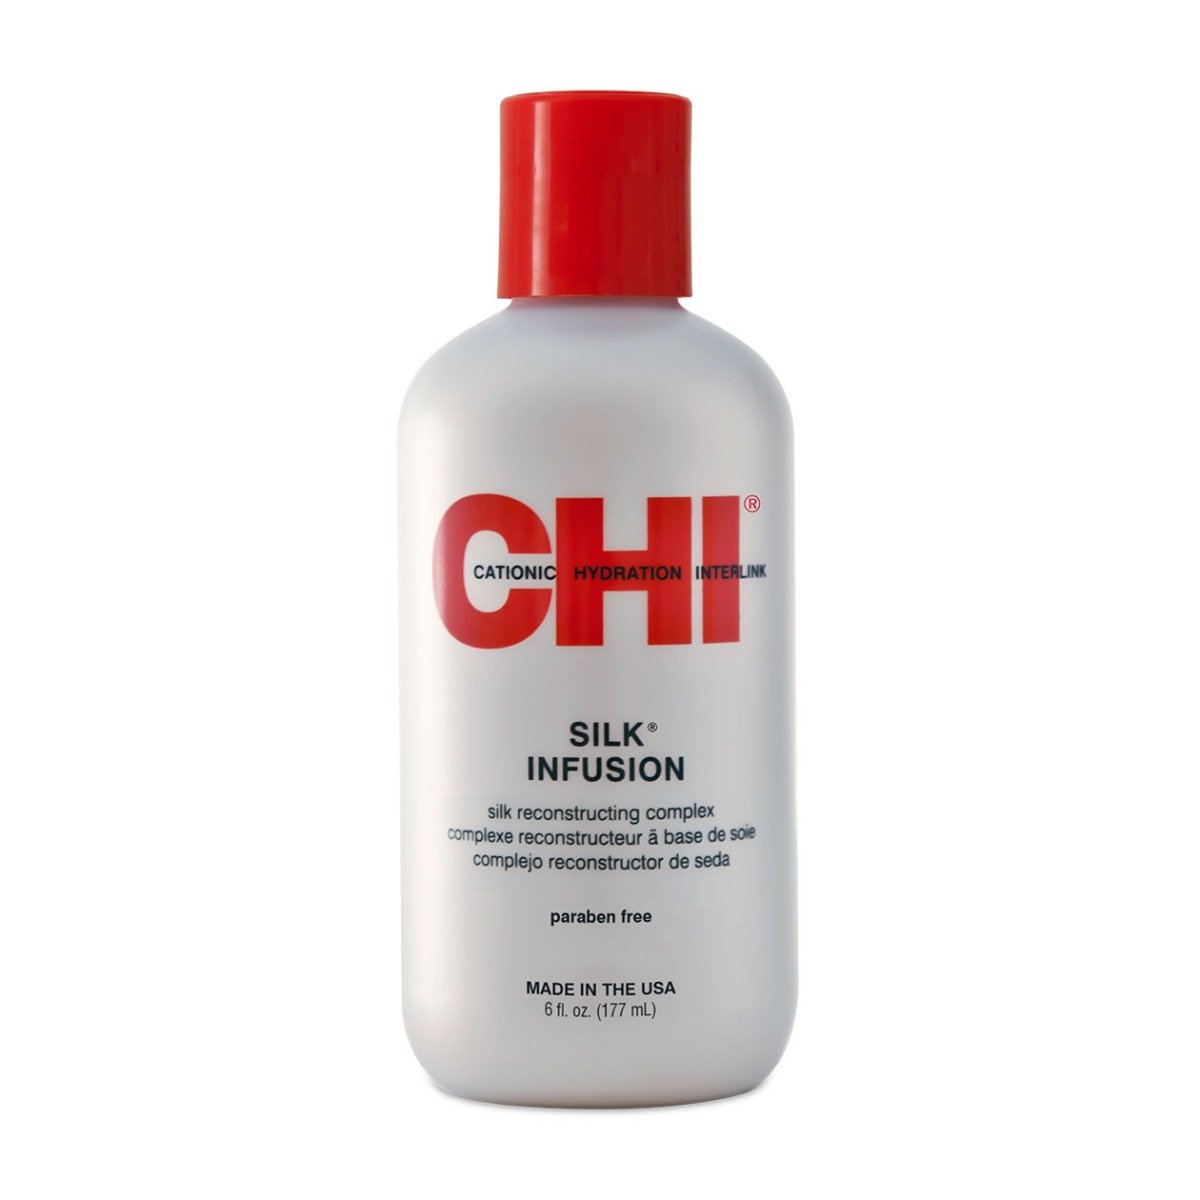 CHI Silk Infusion - Bloom Pharmacy